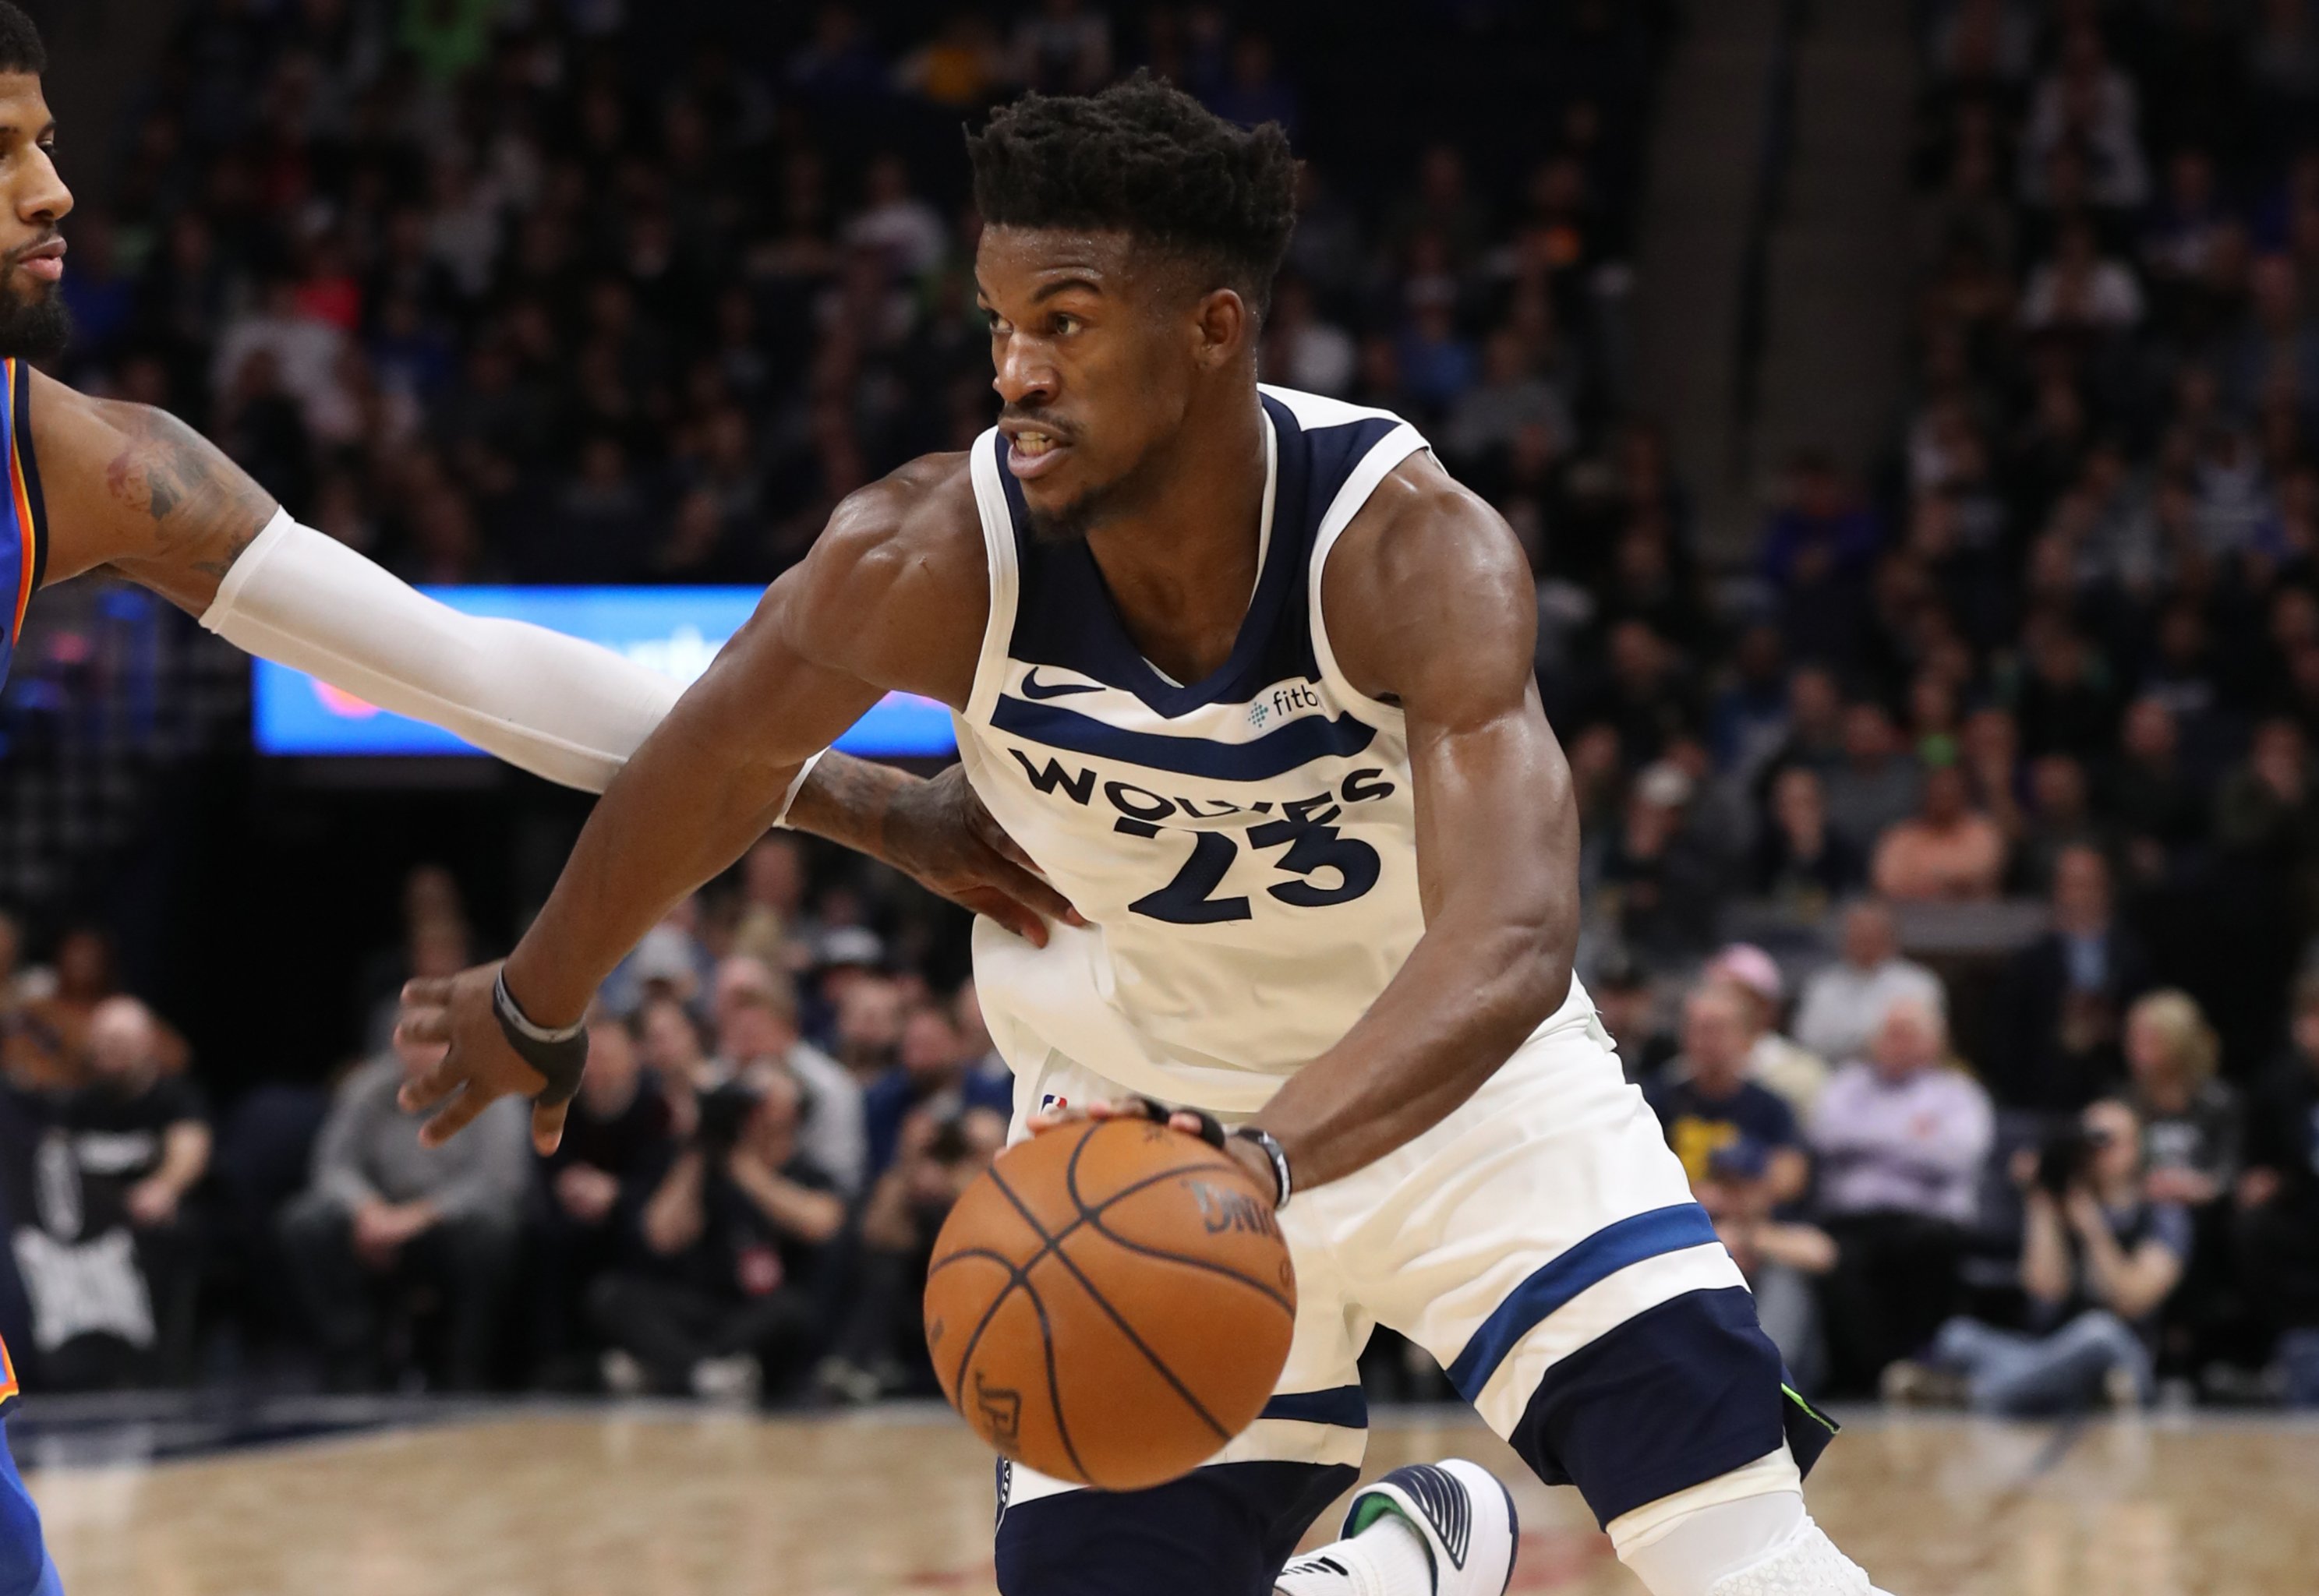 Jimmy Butler has warning for foes ahead of playoffs